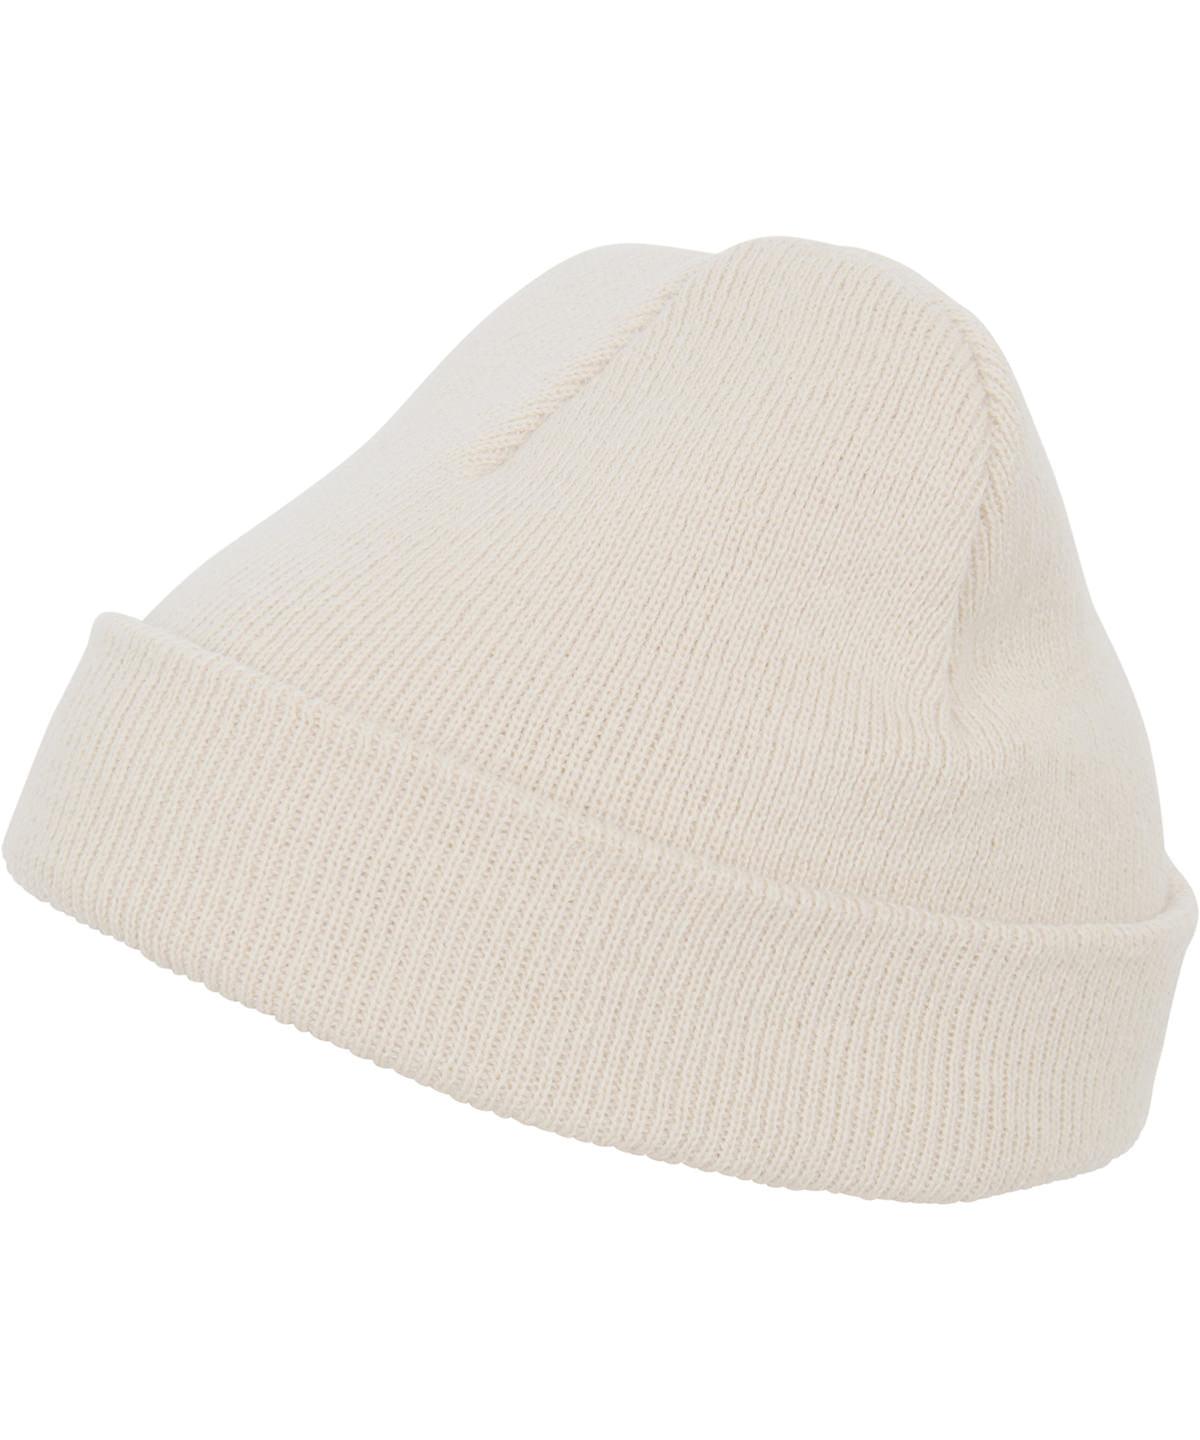 White Sand - Heavyweight beanie (1500KC) Hats Flexfit by Yupoong Headwear, New Colours for 2023, Winter Essentials Schoolwear Centres